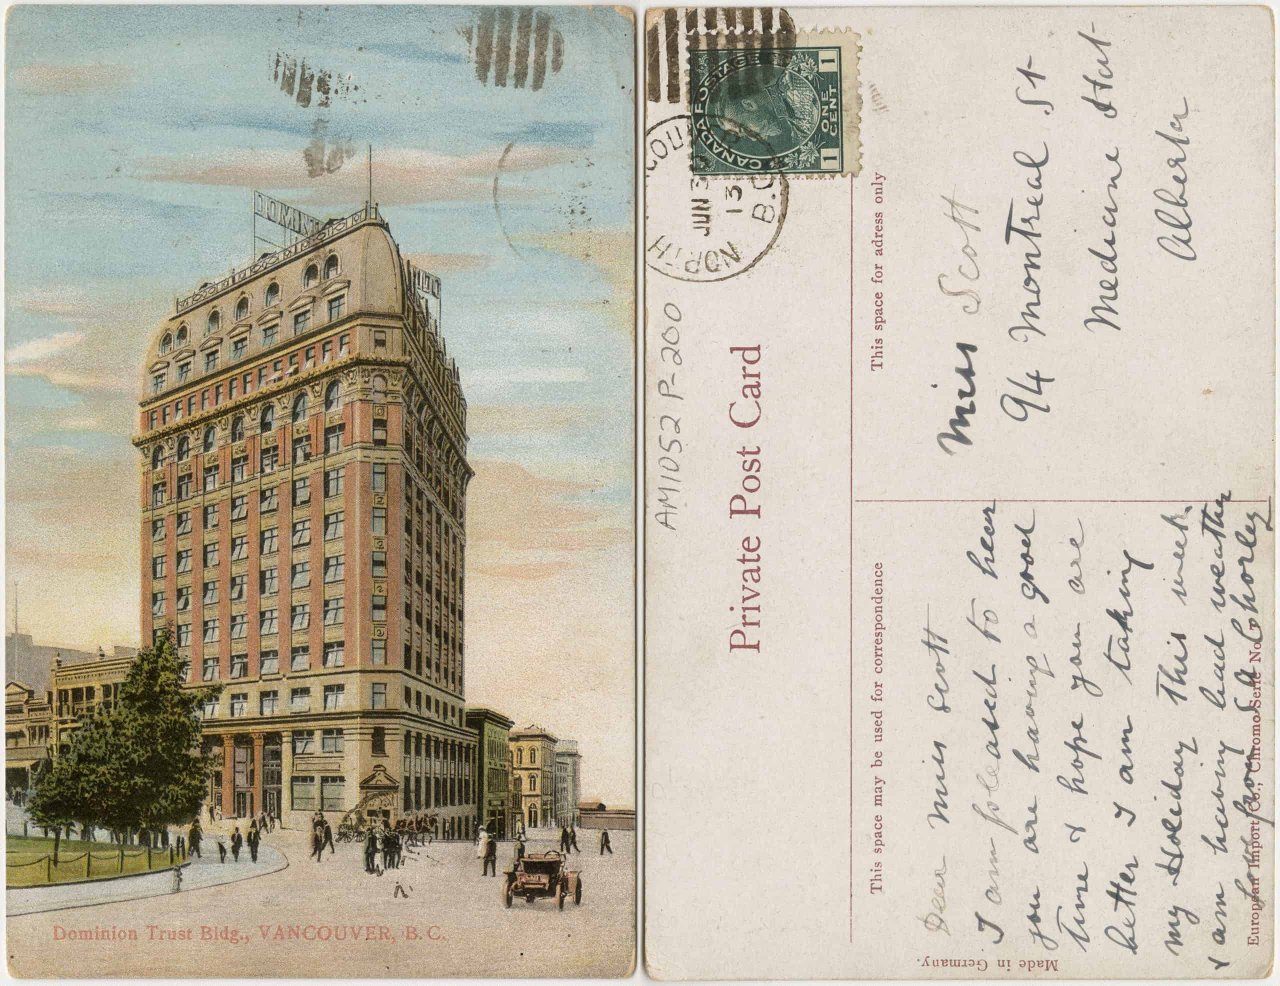 Postcard featuring the Dominion Building in 1913. Source: City of Vancouver Archives AM1052 P-200.